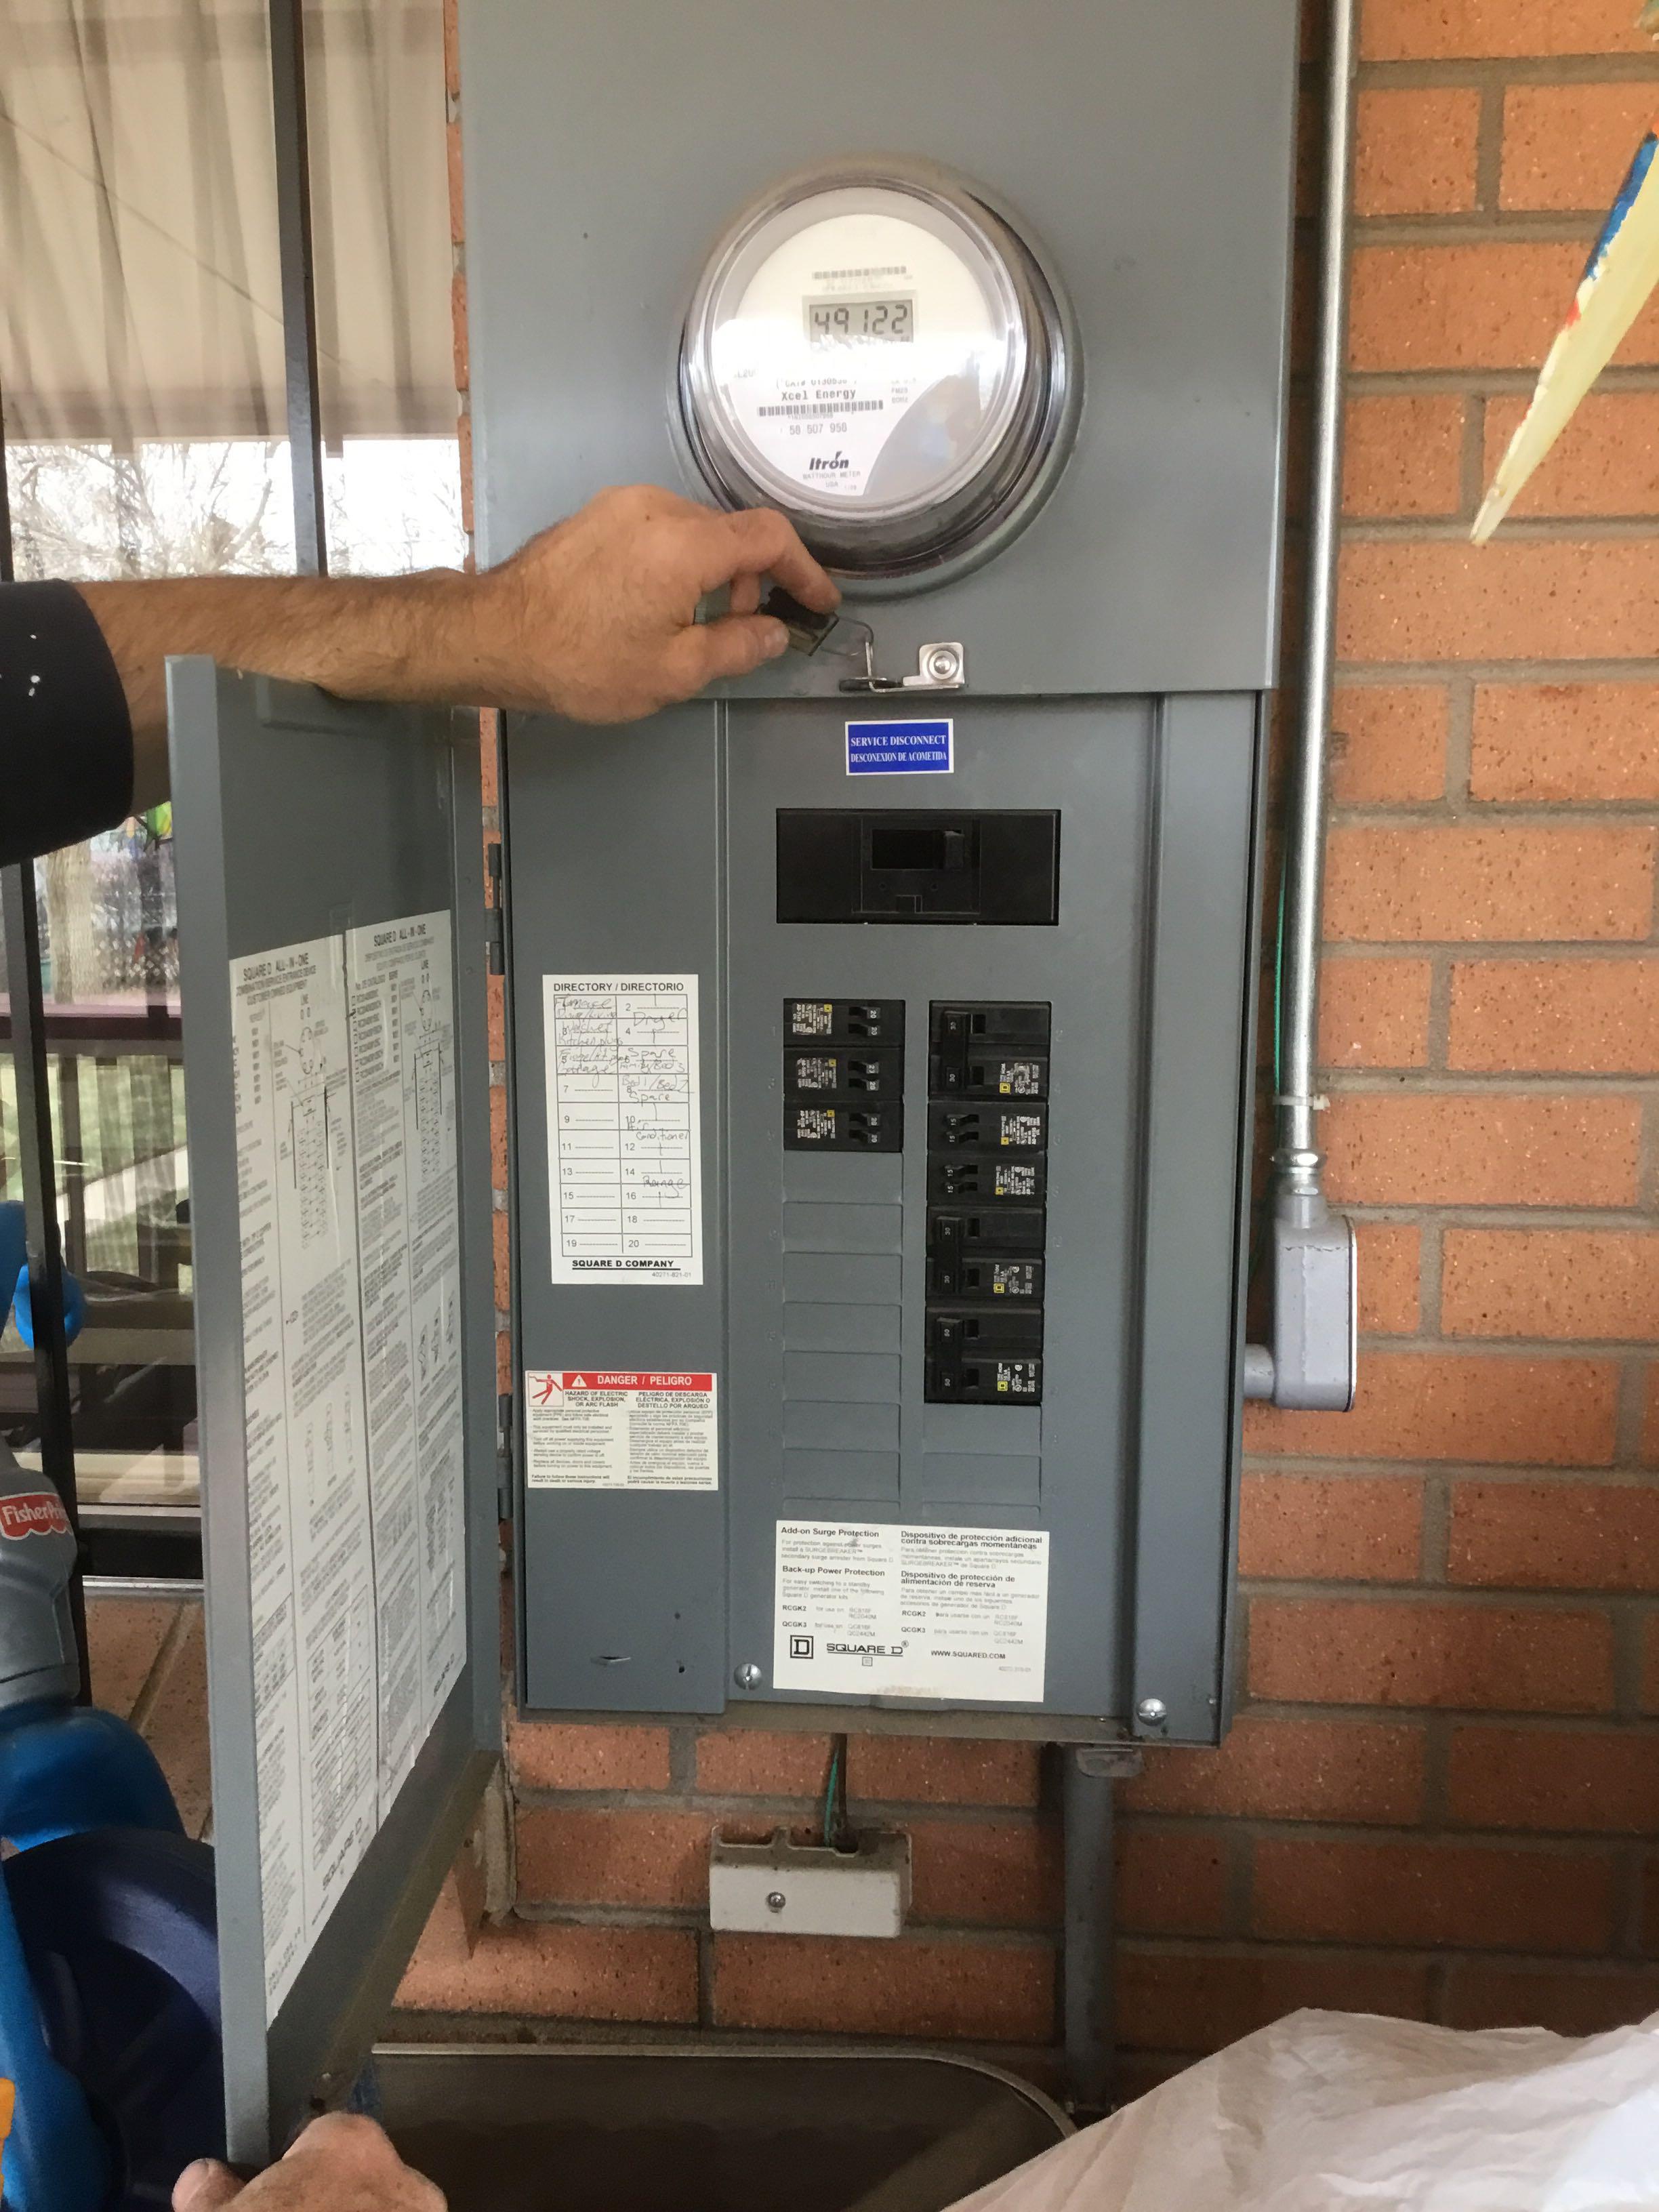 APower Electric Service Photo